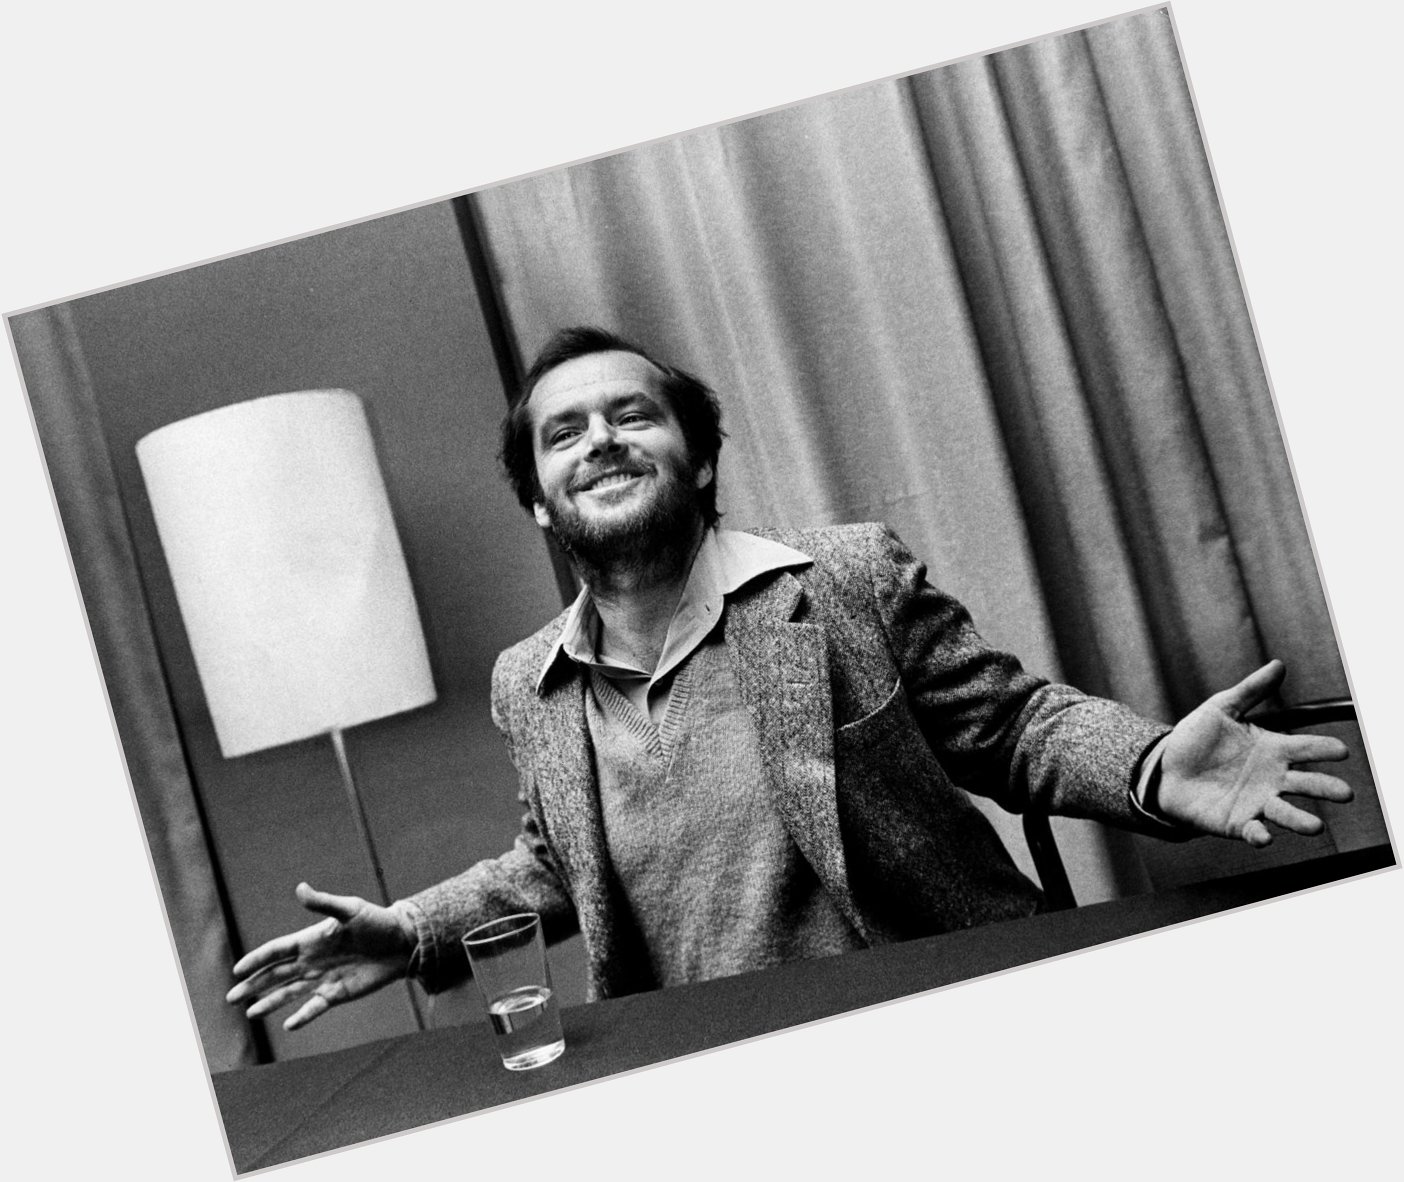 Happy Birthday to Share your favorite Jack Nicholson films! 